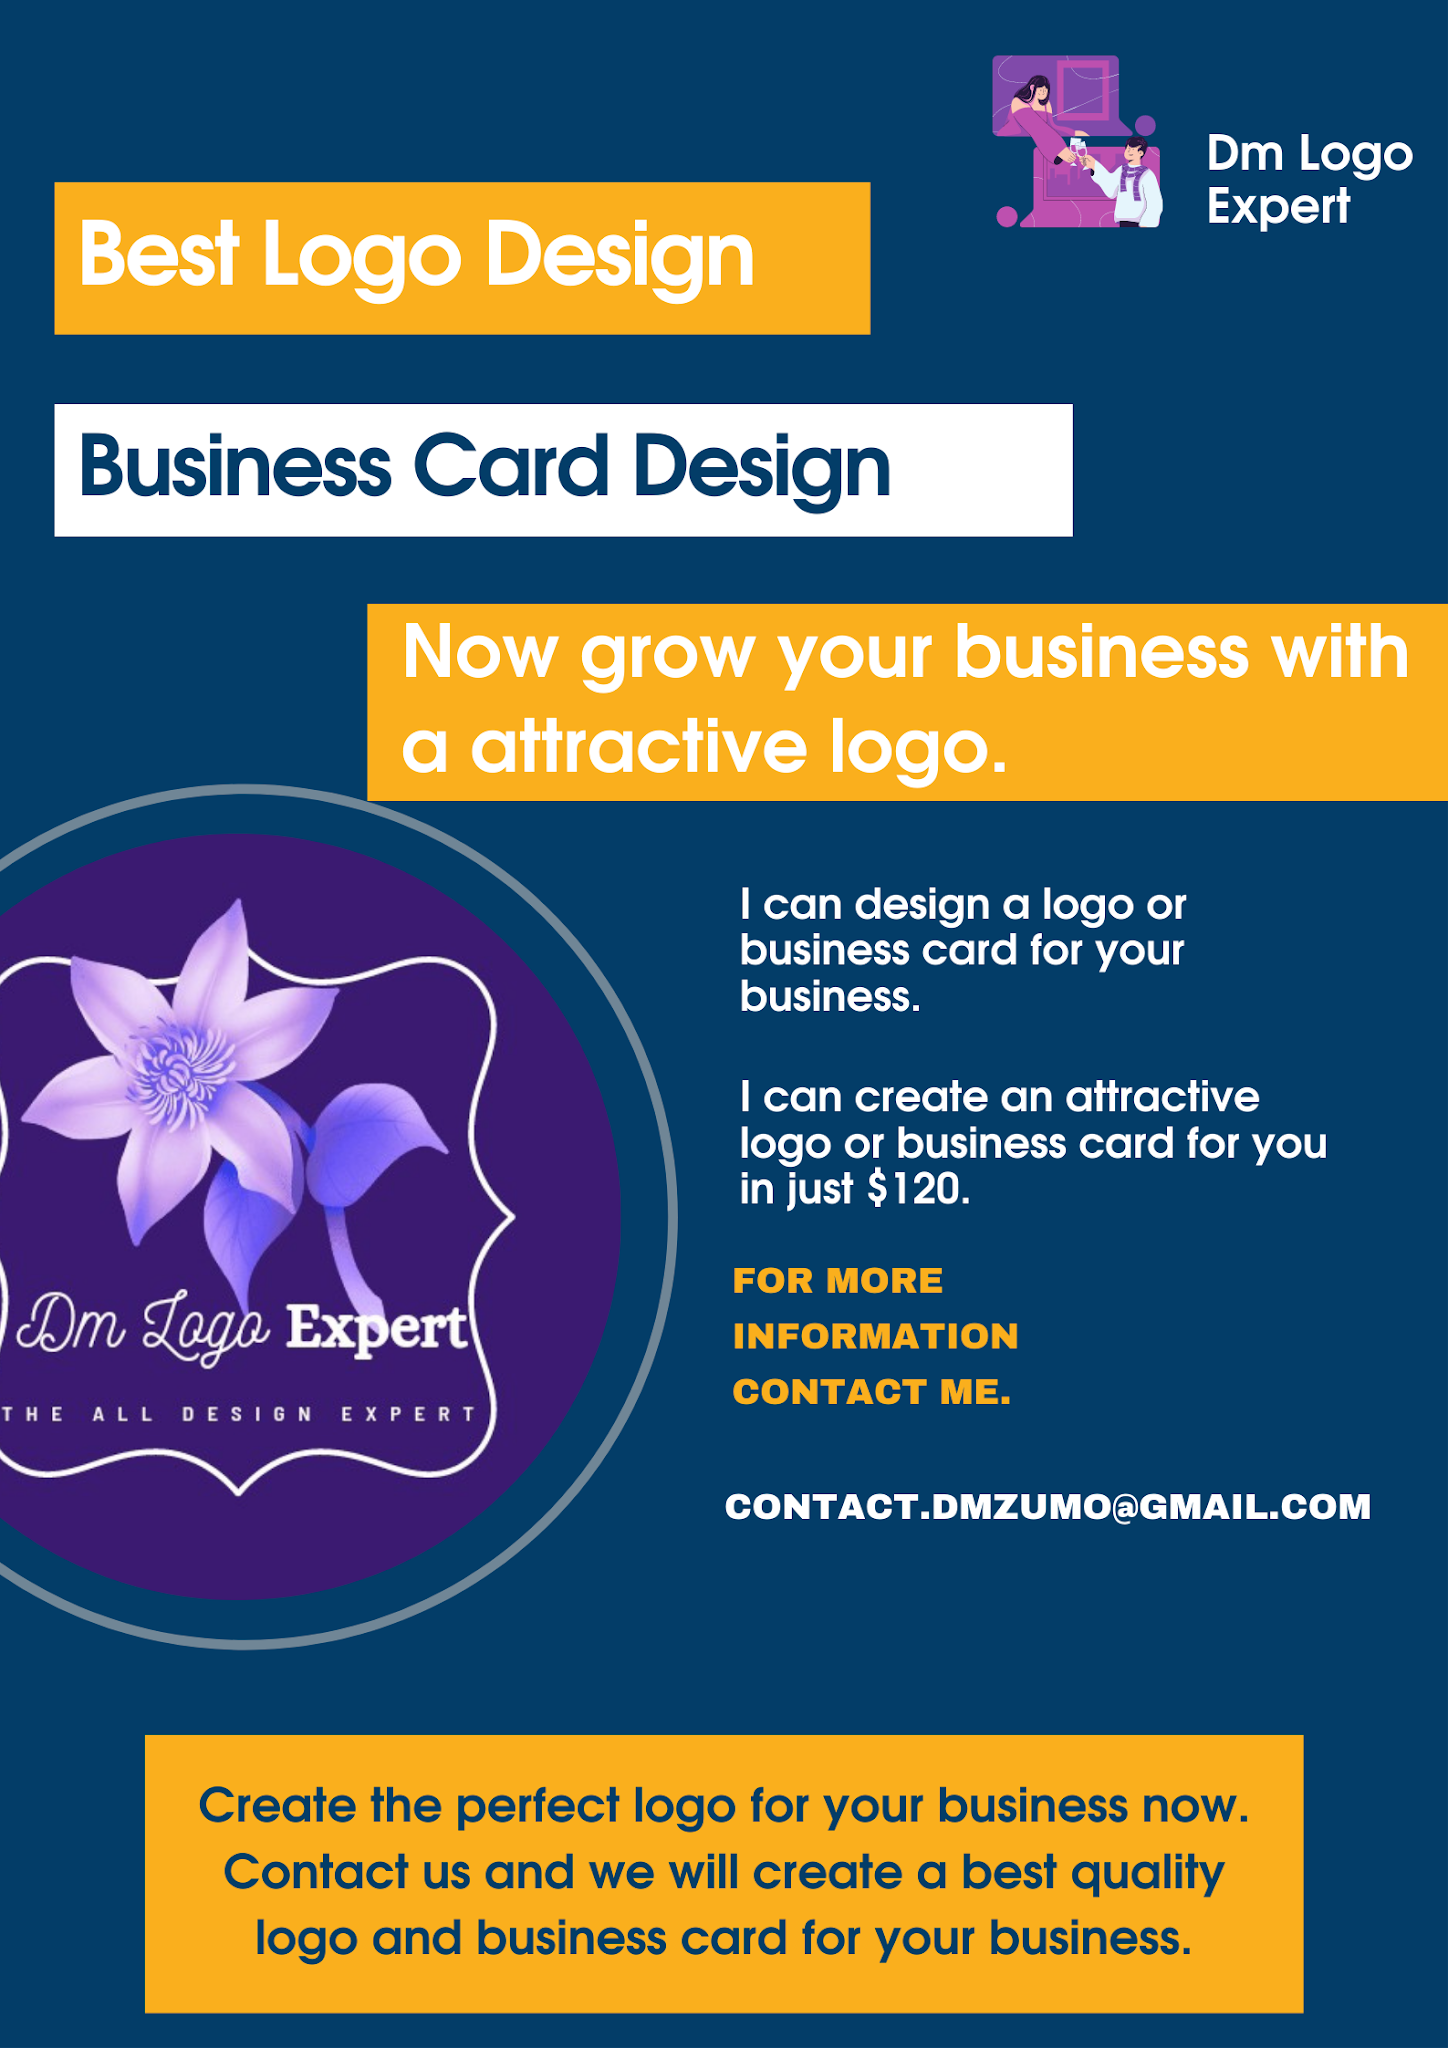 How to Create a Beautiful Attractive Logo Design Your Business